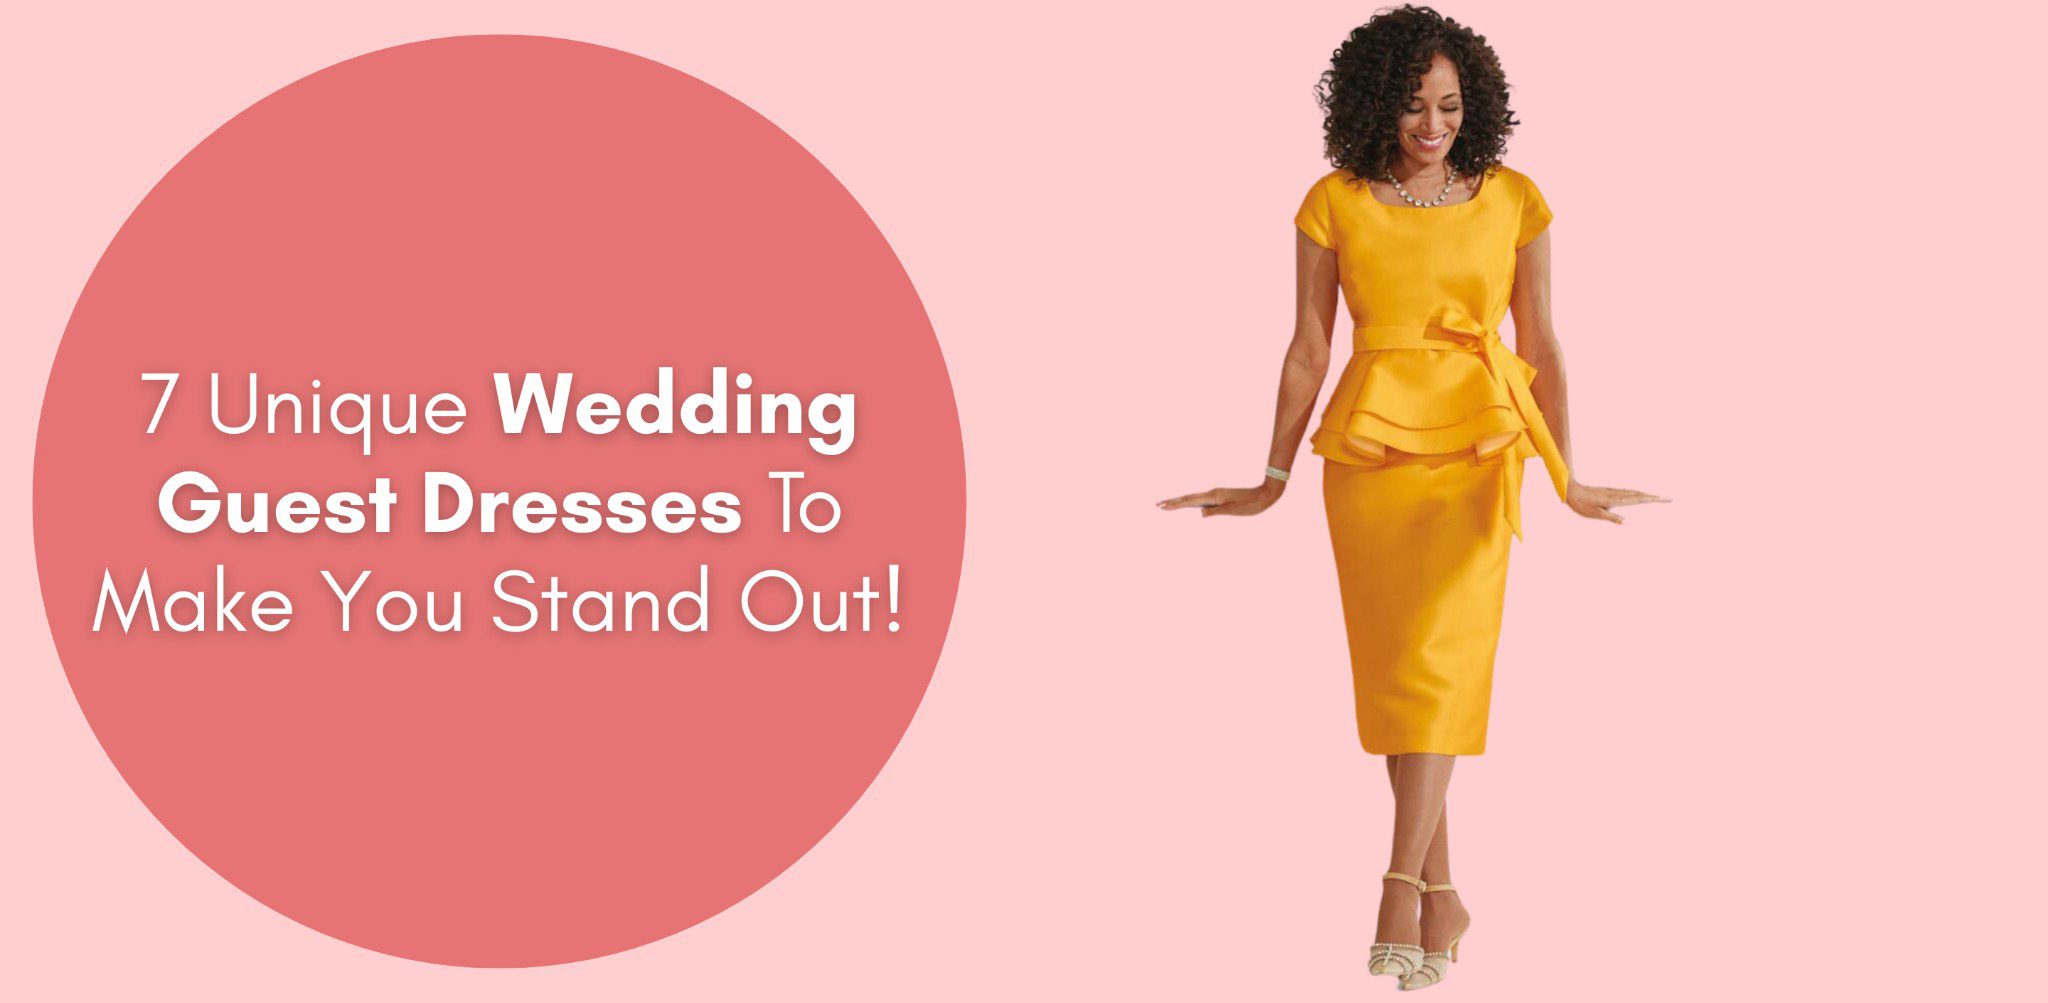 7 unique wedding guest dresses to make you stand out